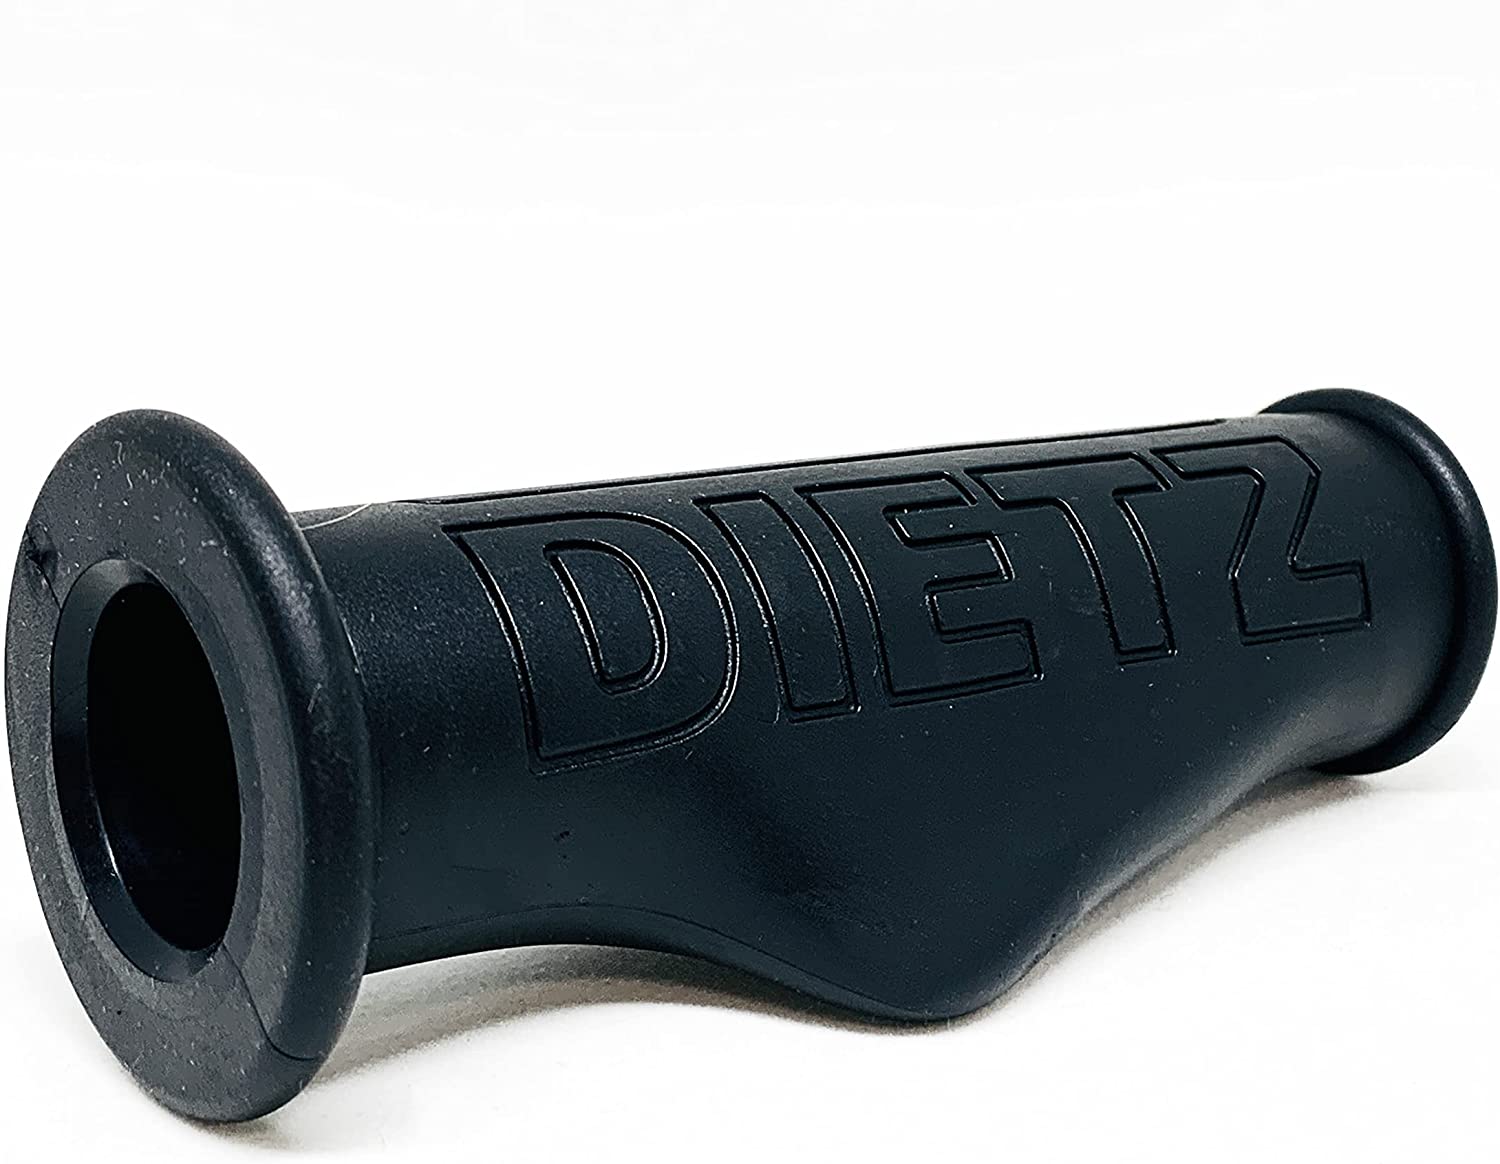 DIETZ GmbH Reha-Produkte Grip Anatomic Left For Rollator and Delta Gehrad (Dietz), Accessory for Wal